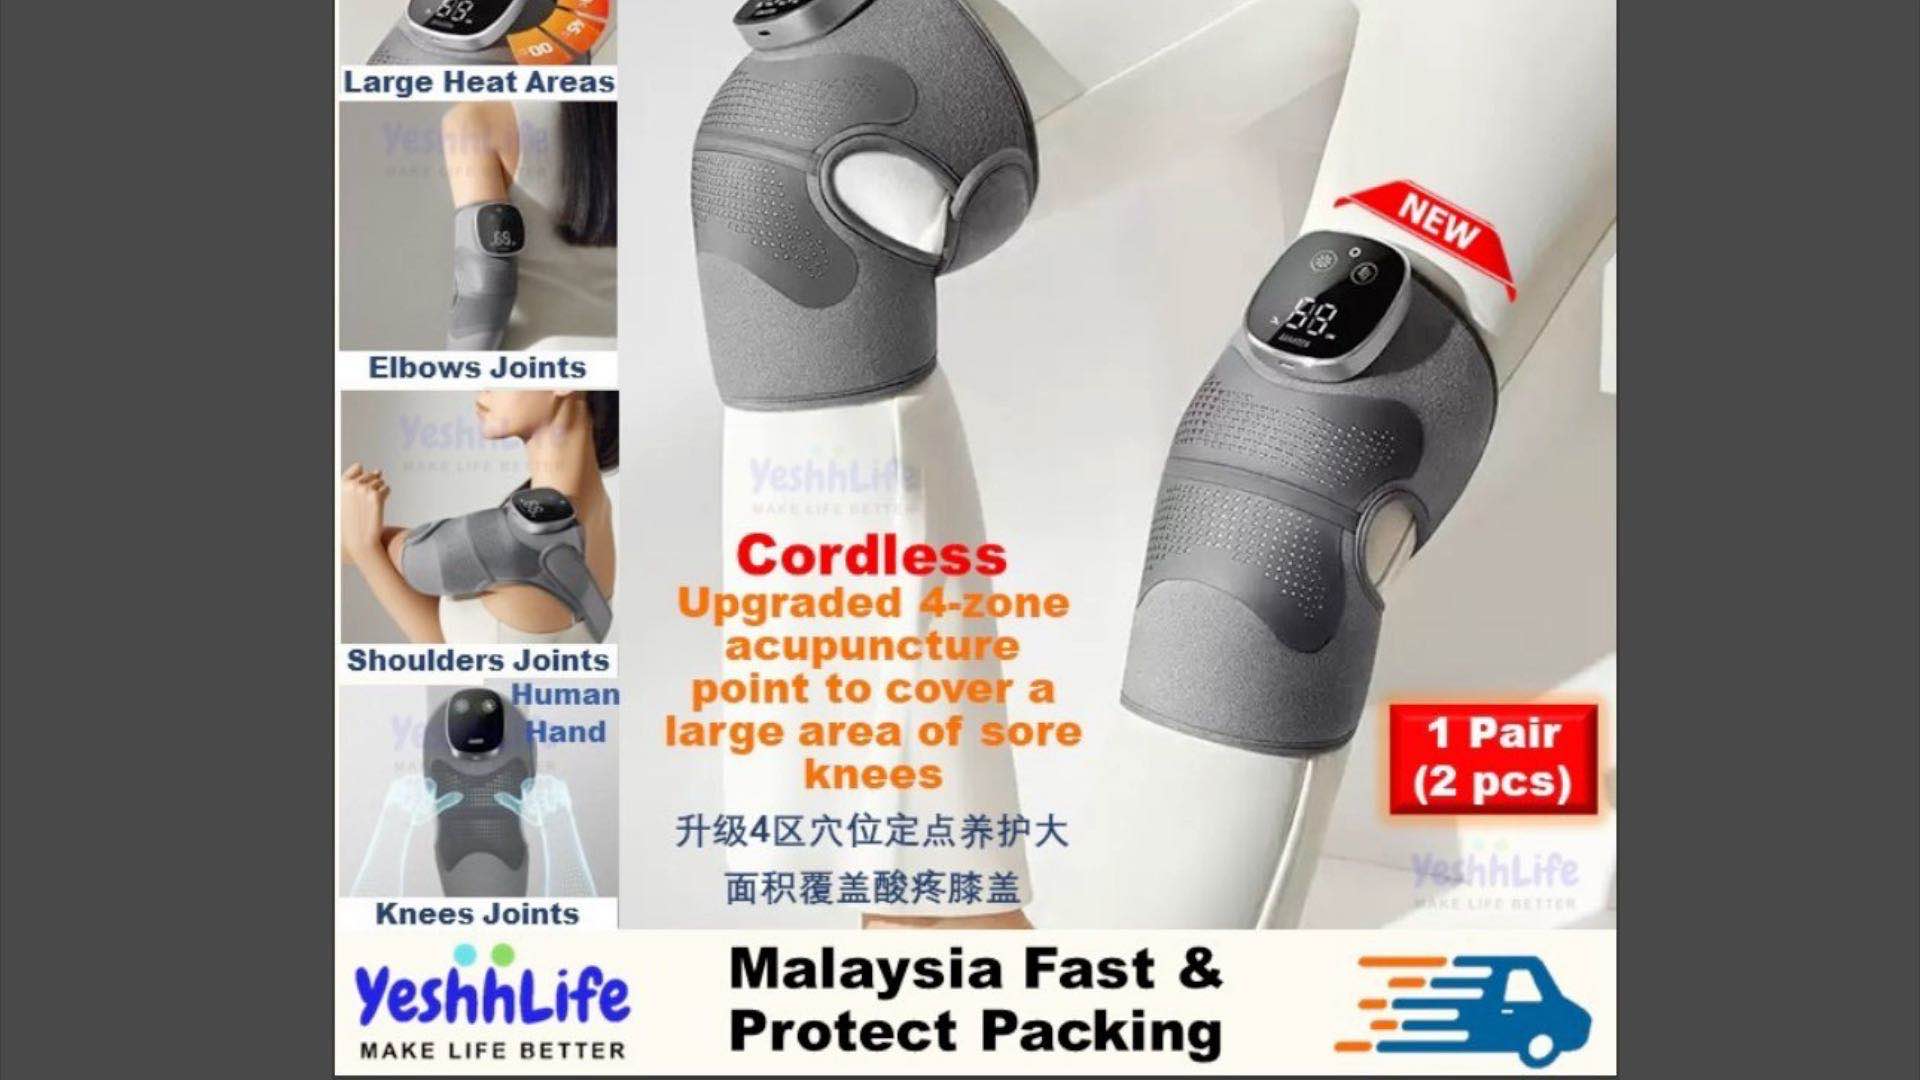 Cordless Knee Massager Shoulder Brace with Heat, 3-In-1 Heated Knee Elbow  Shoulder Brace Wrap, Vibration Knee Heating Pad, 3 Vibrations and Heating  Modes,Heating Pad for Knee Elbow Shoulder Relax,2Pcs 